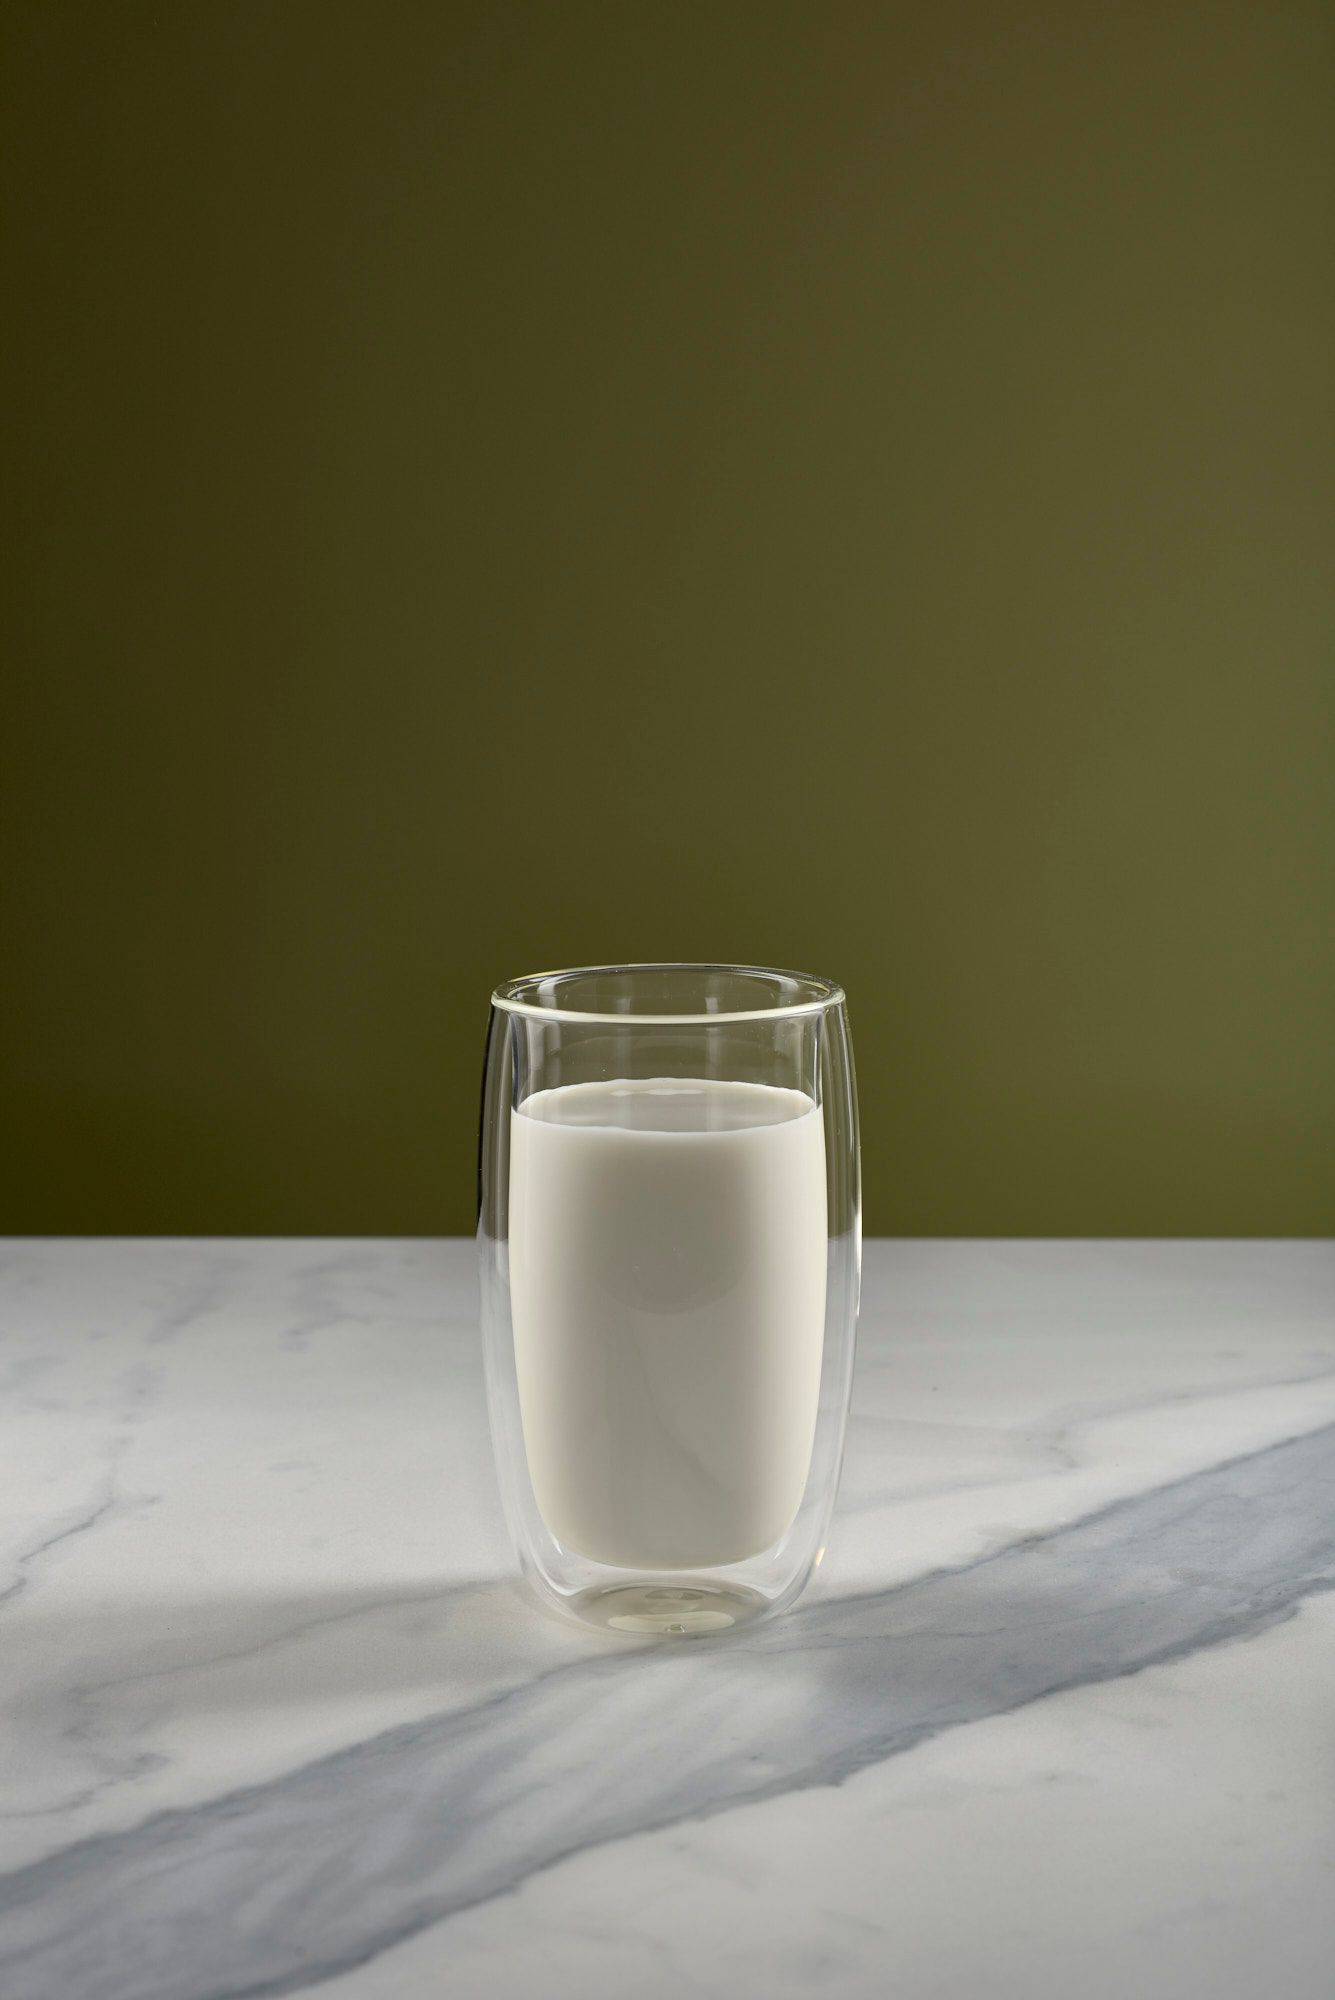 a glas of milk and cream with a marbled sapienstone top and green background